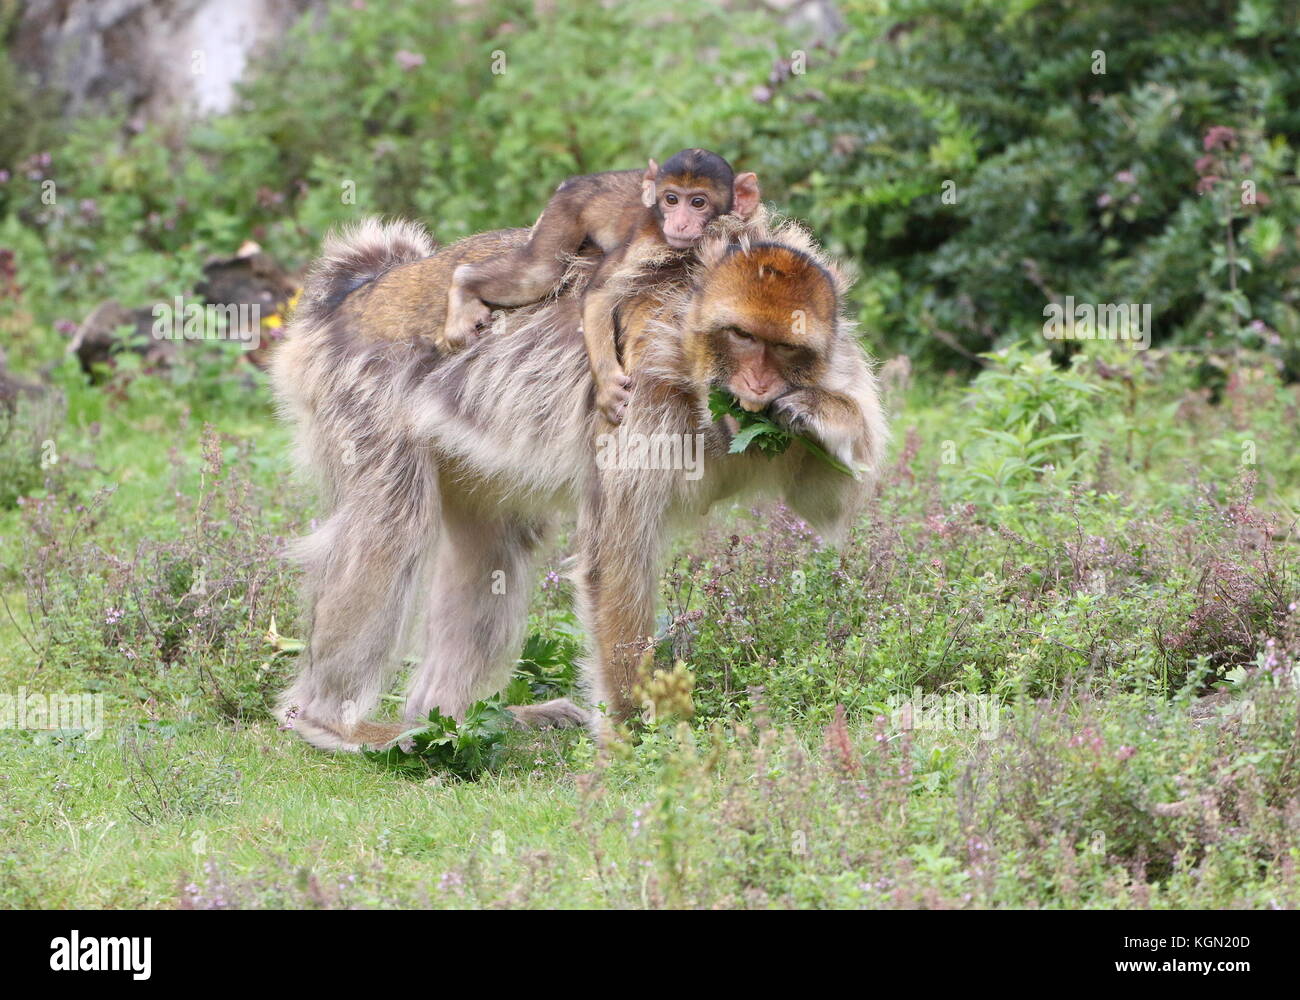 Mother Barbary macaque (Macaca sylvanus) with her baby on her back Stock Photo